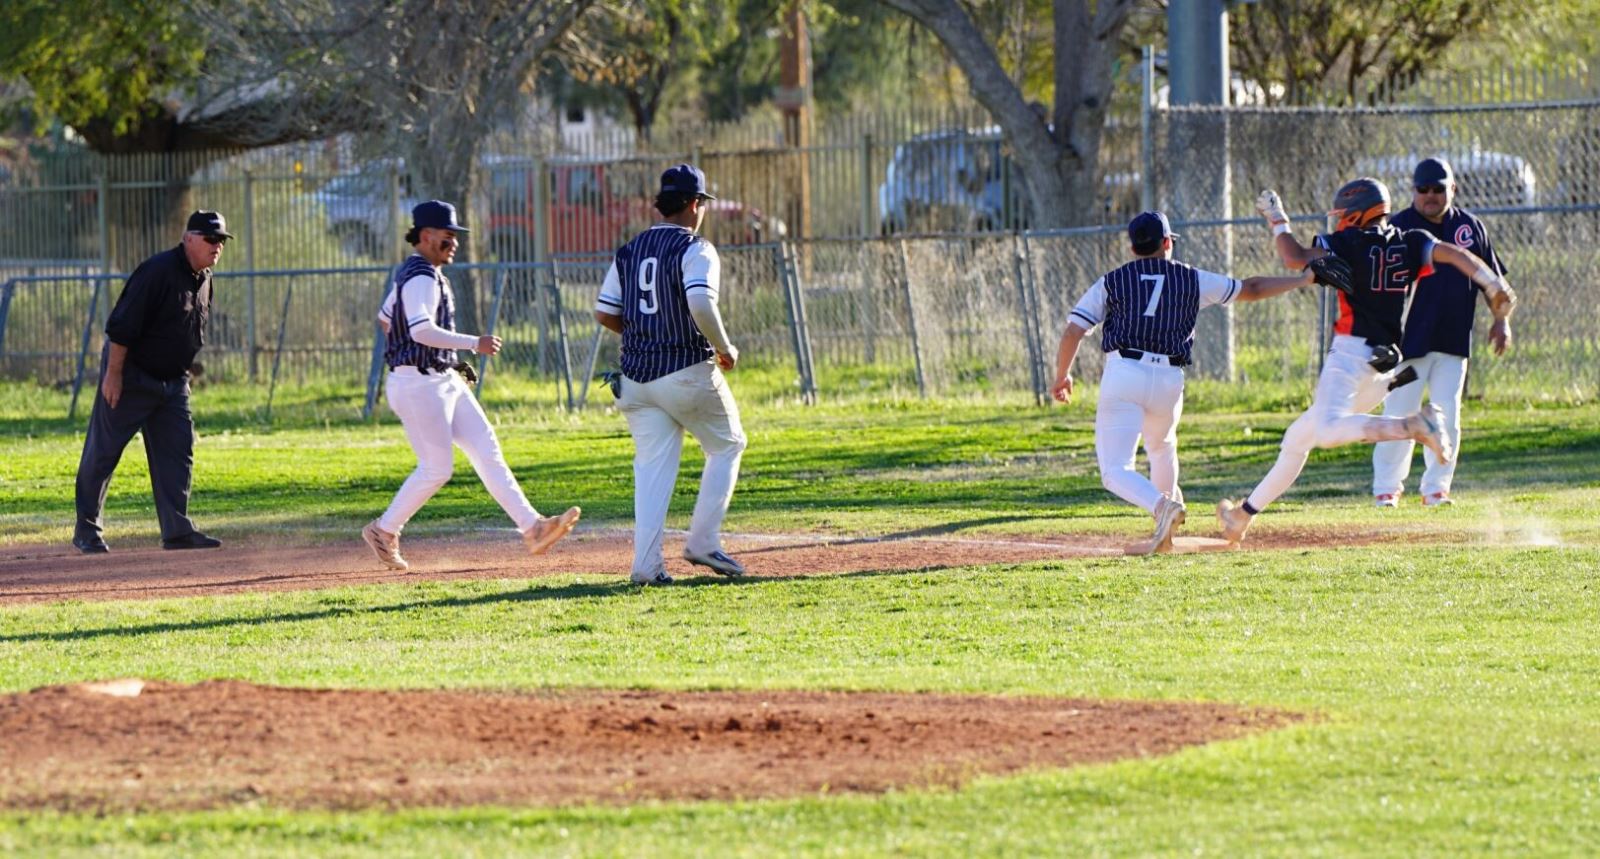 Pueblo baseball players run to get a Cholla player out